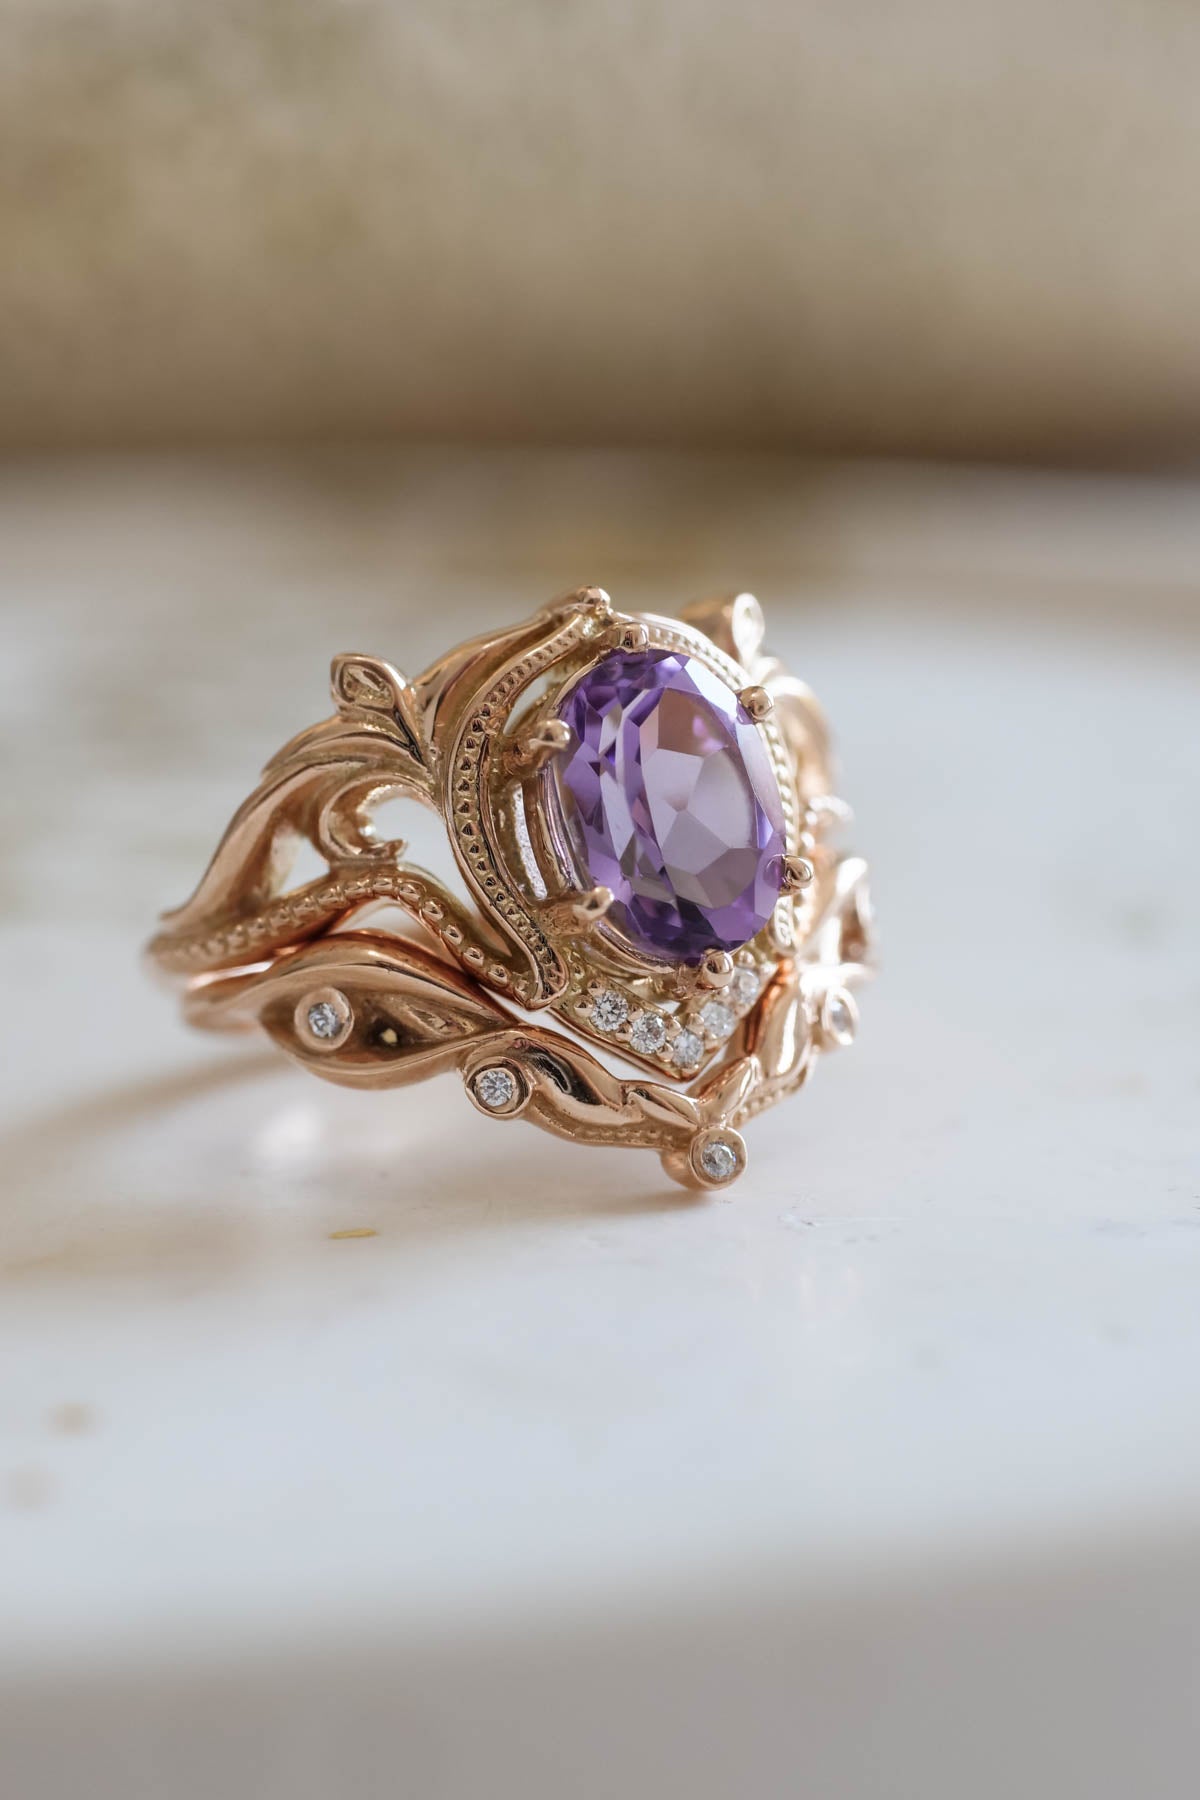 Ornate engagement ring set with amethyst, vintage inspired gold rings / Lida - Eden Garden Jewelry™